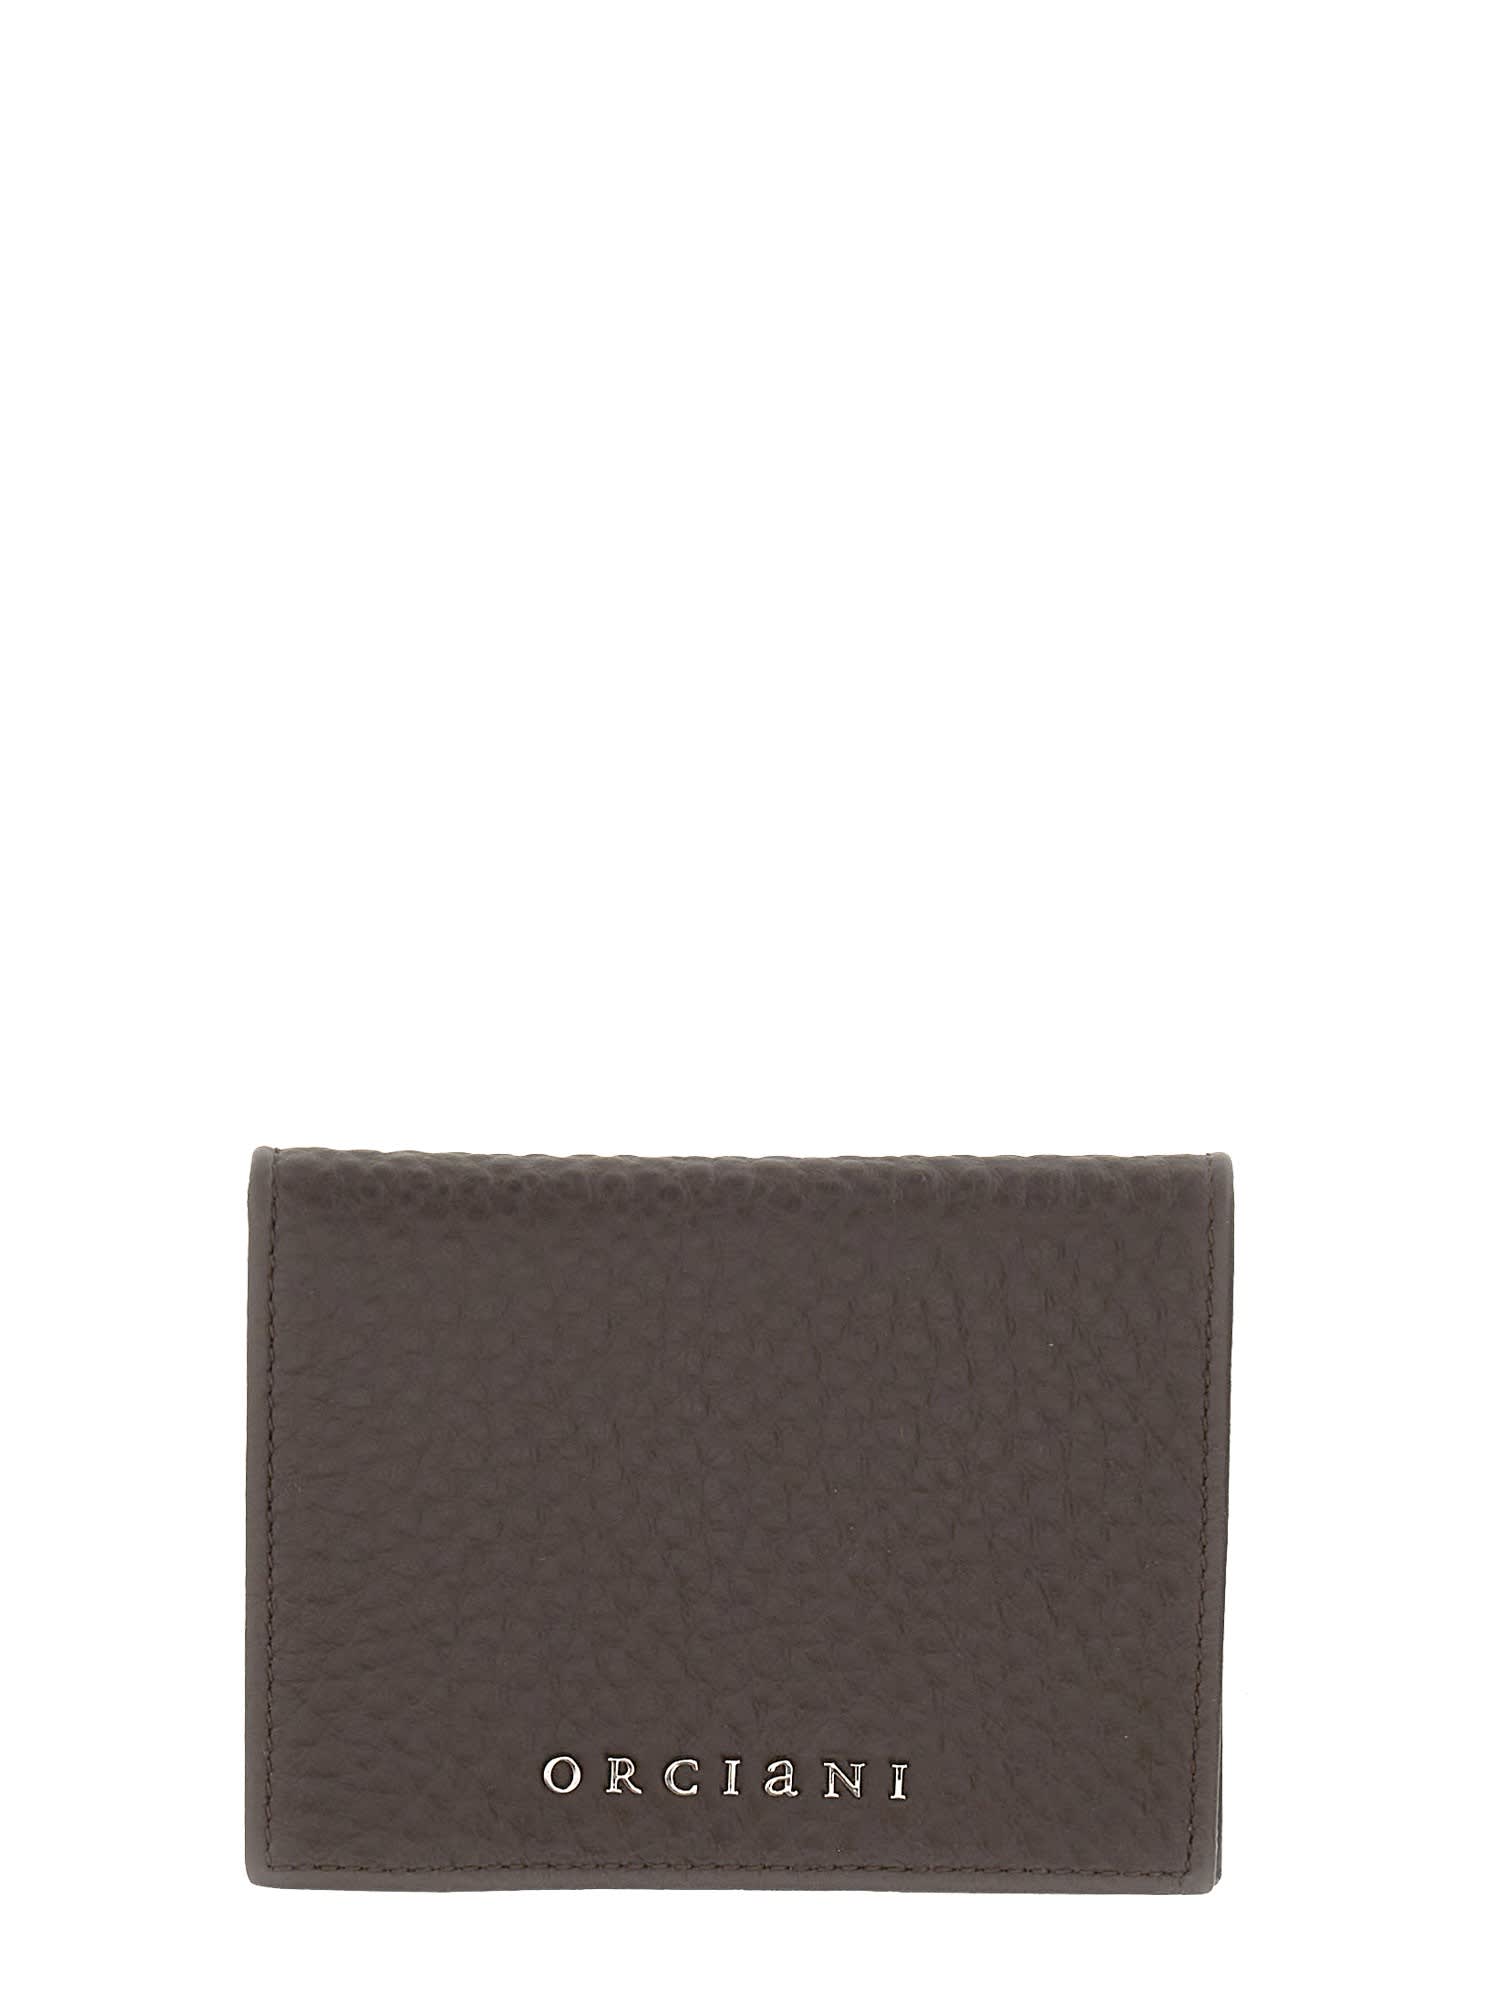 Orciani Soft Leather Wallet In Brown